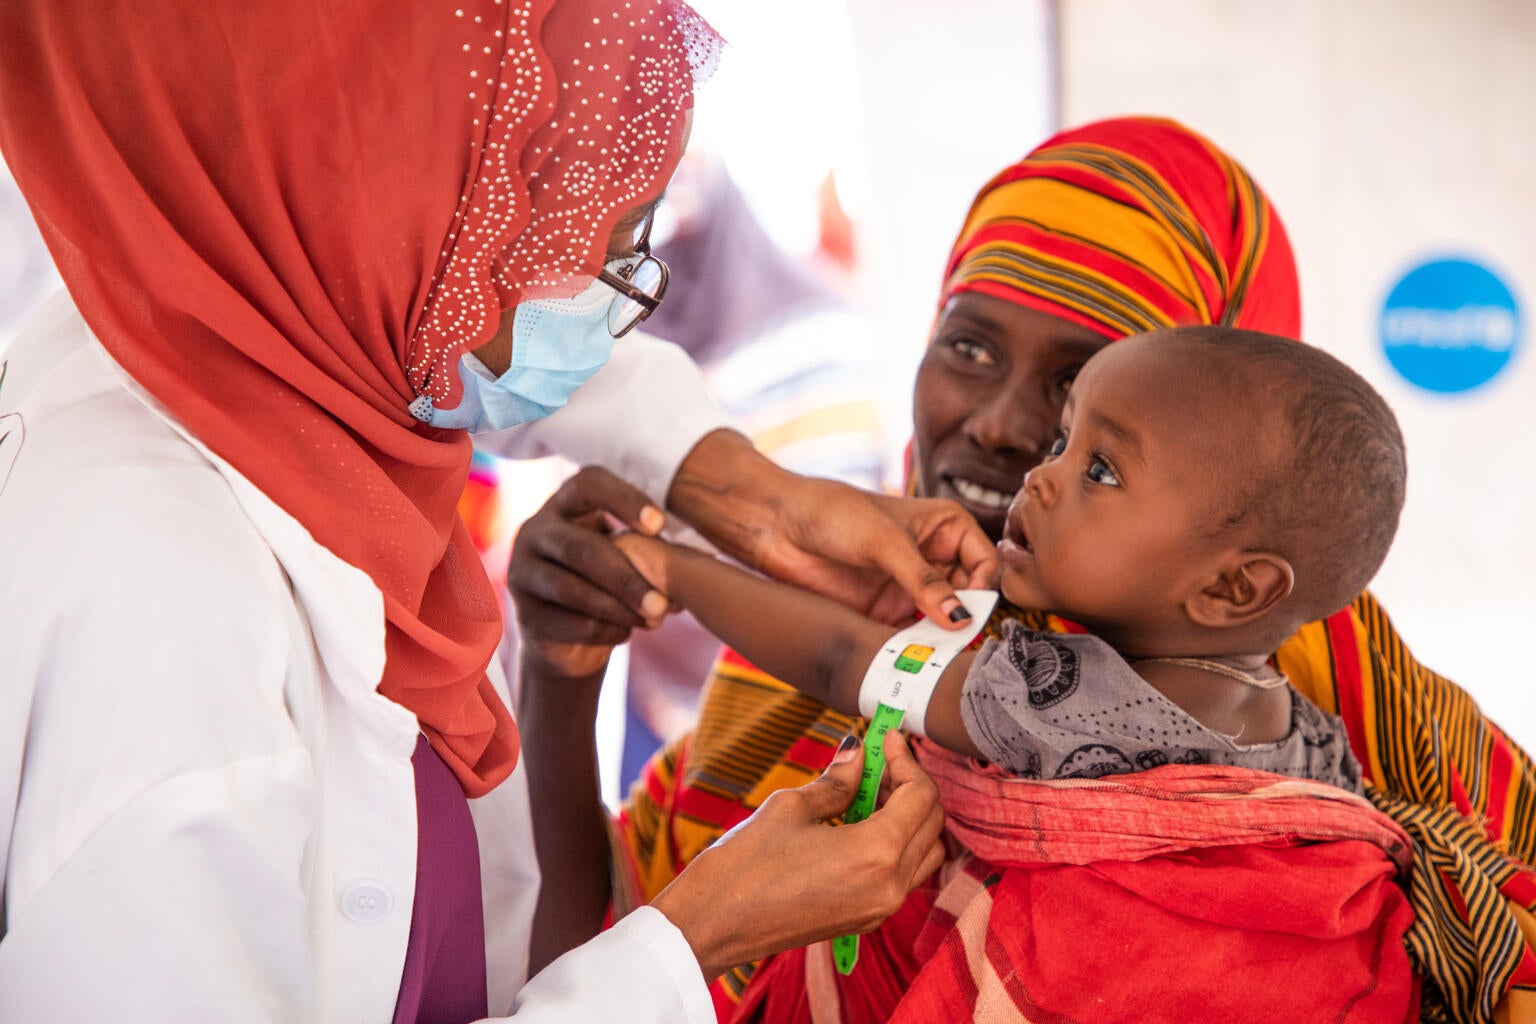 In Ethiopia, a health care worker checks a baby to see if they are suffering from malnutrition 